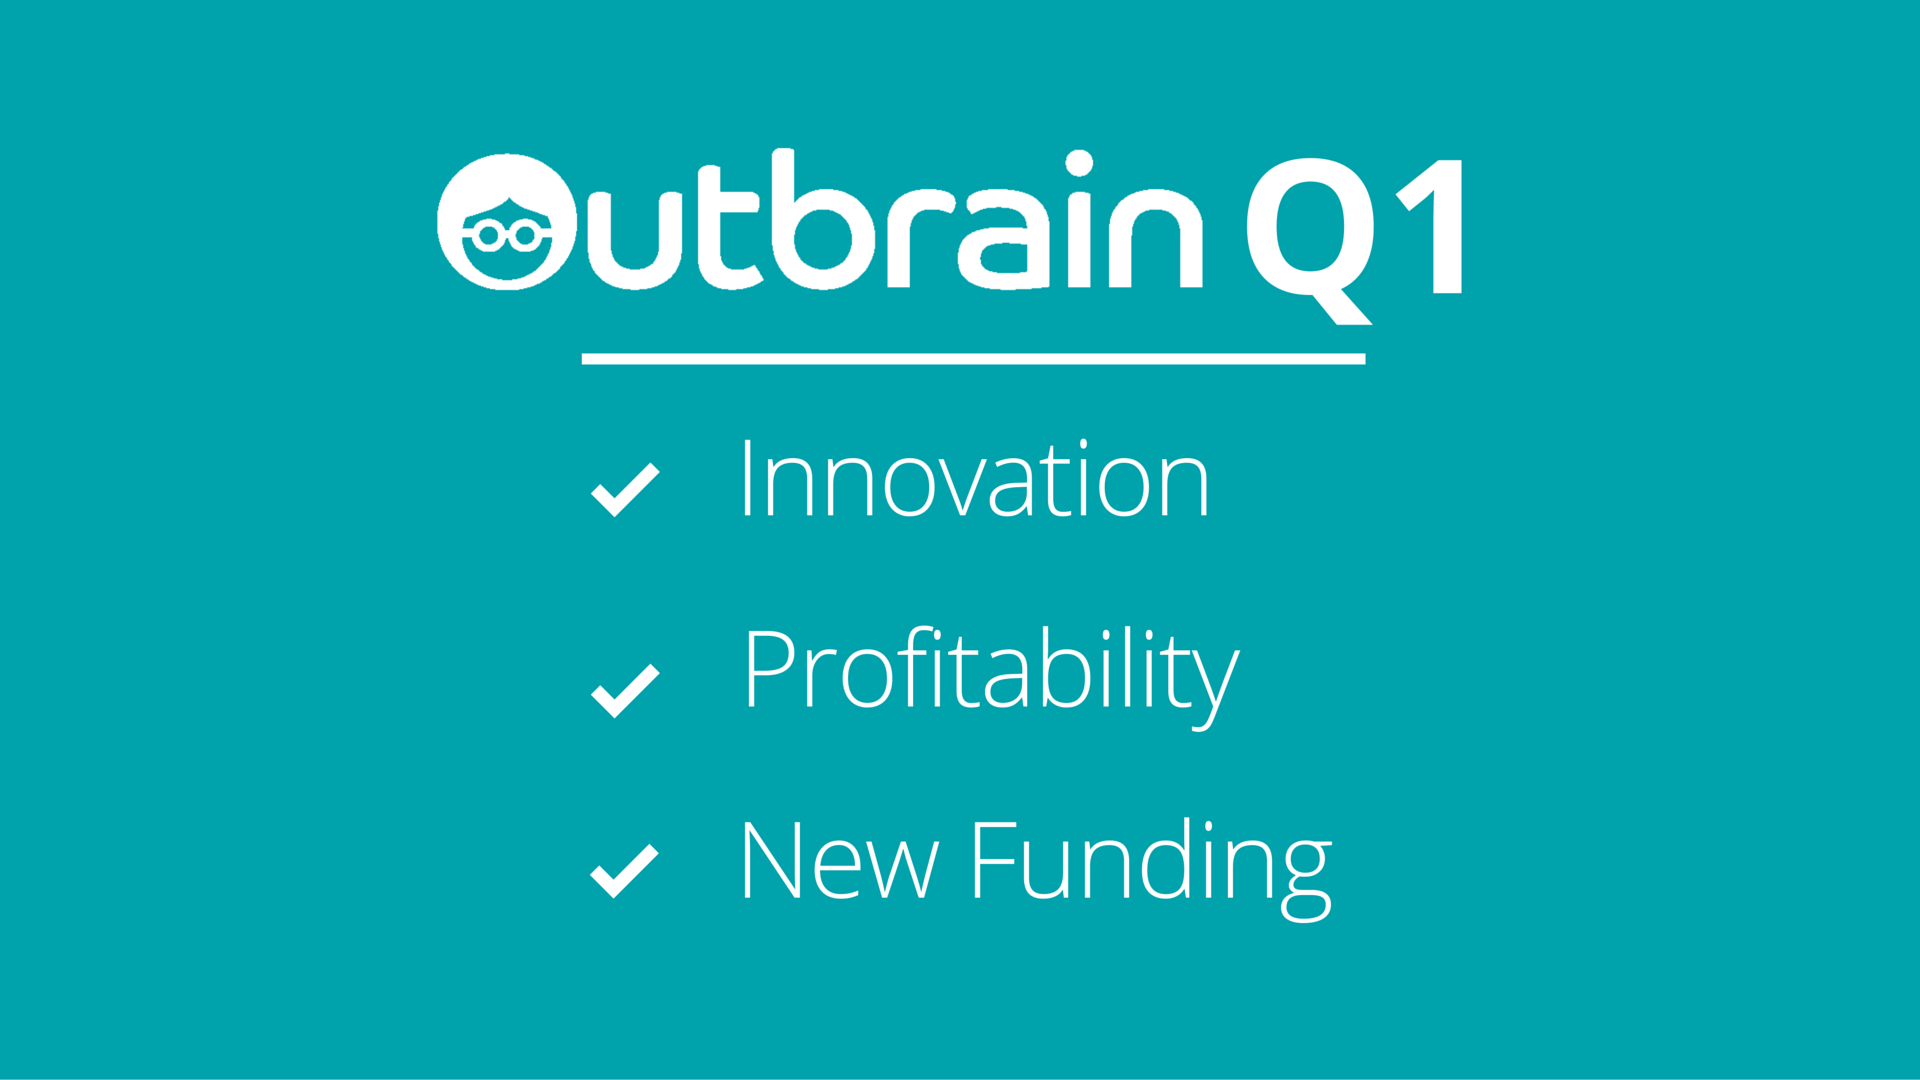 Outbrain Q1 Results_2016